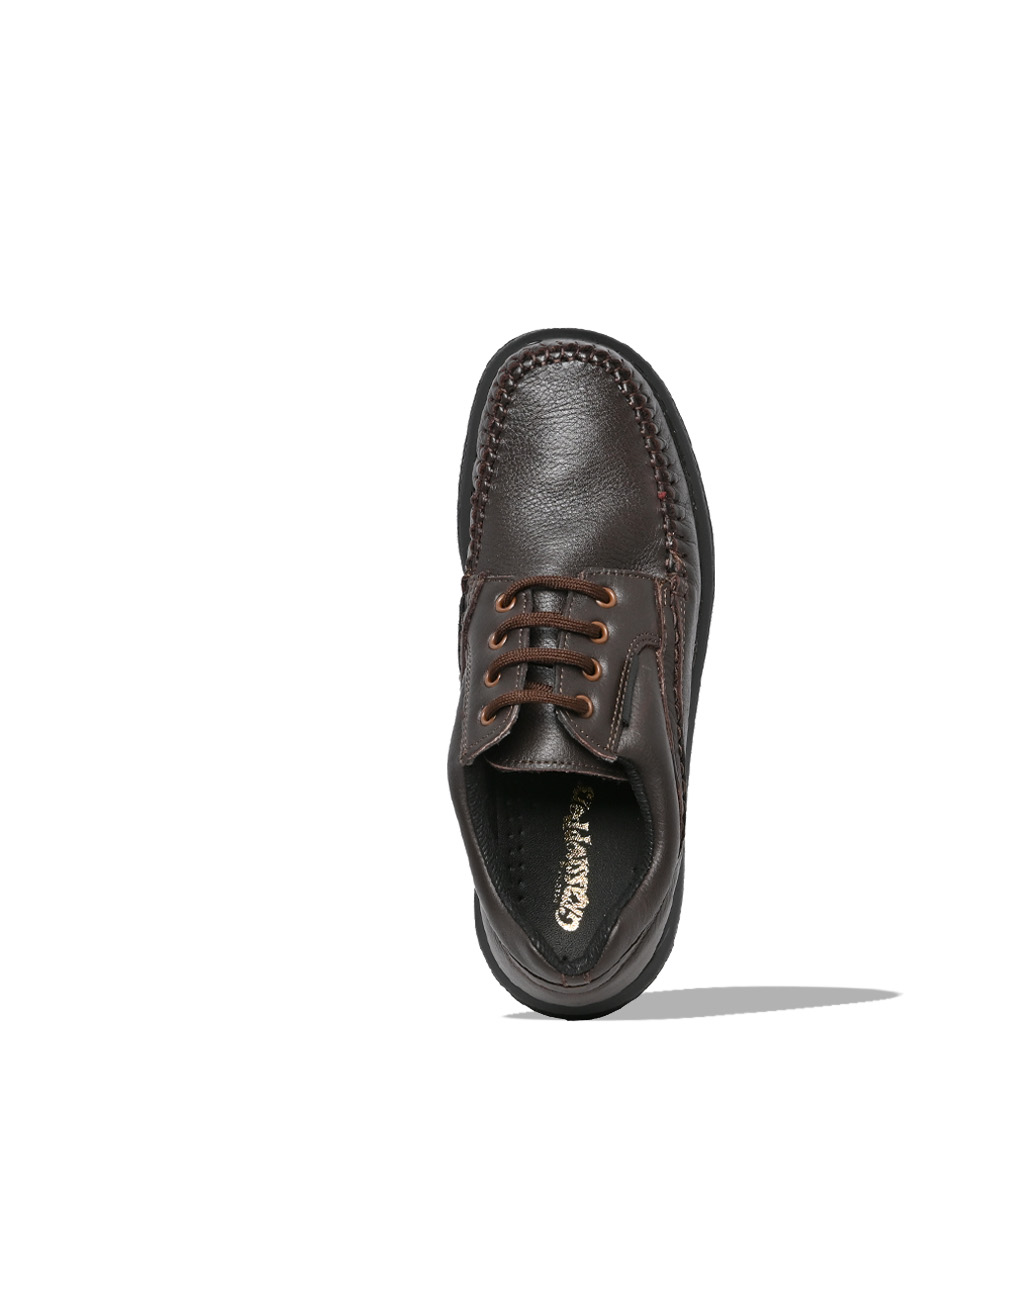 Mens Grasshoppers, Danbury, Casual Dark Brown Lace Up – Bolton Shoes